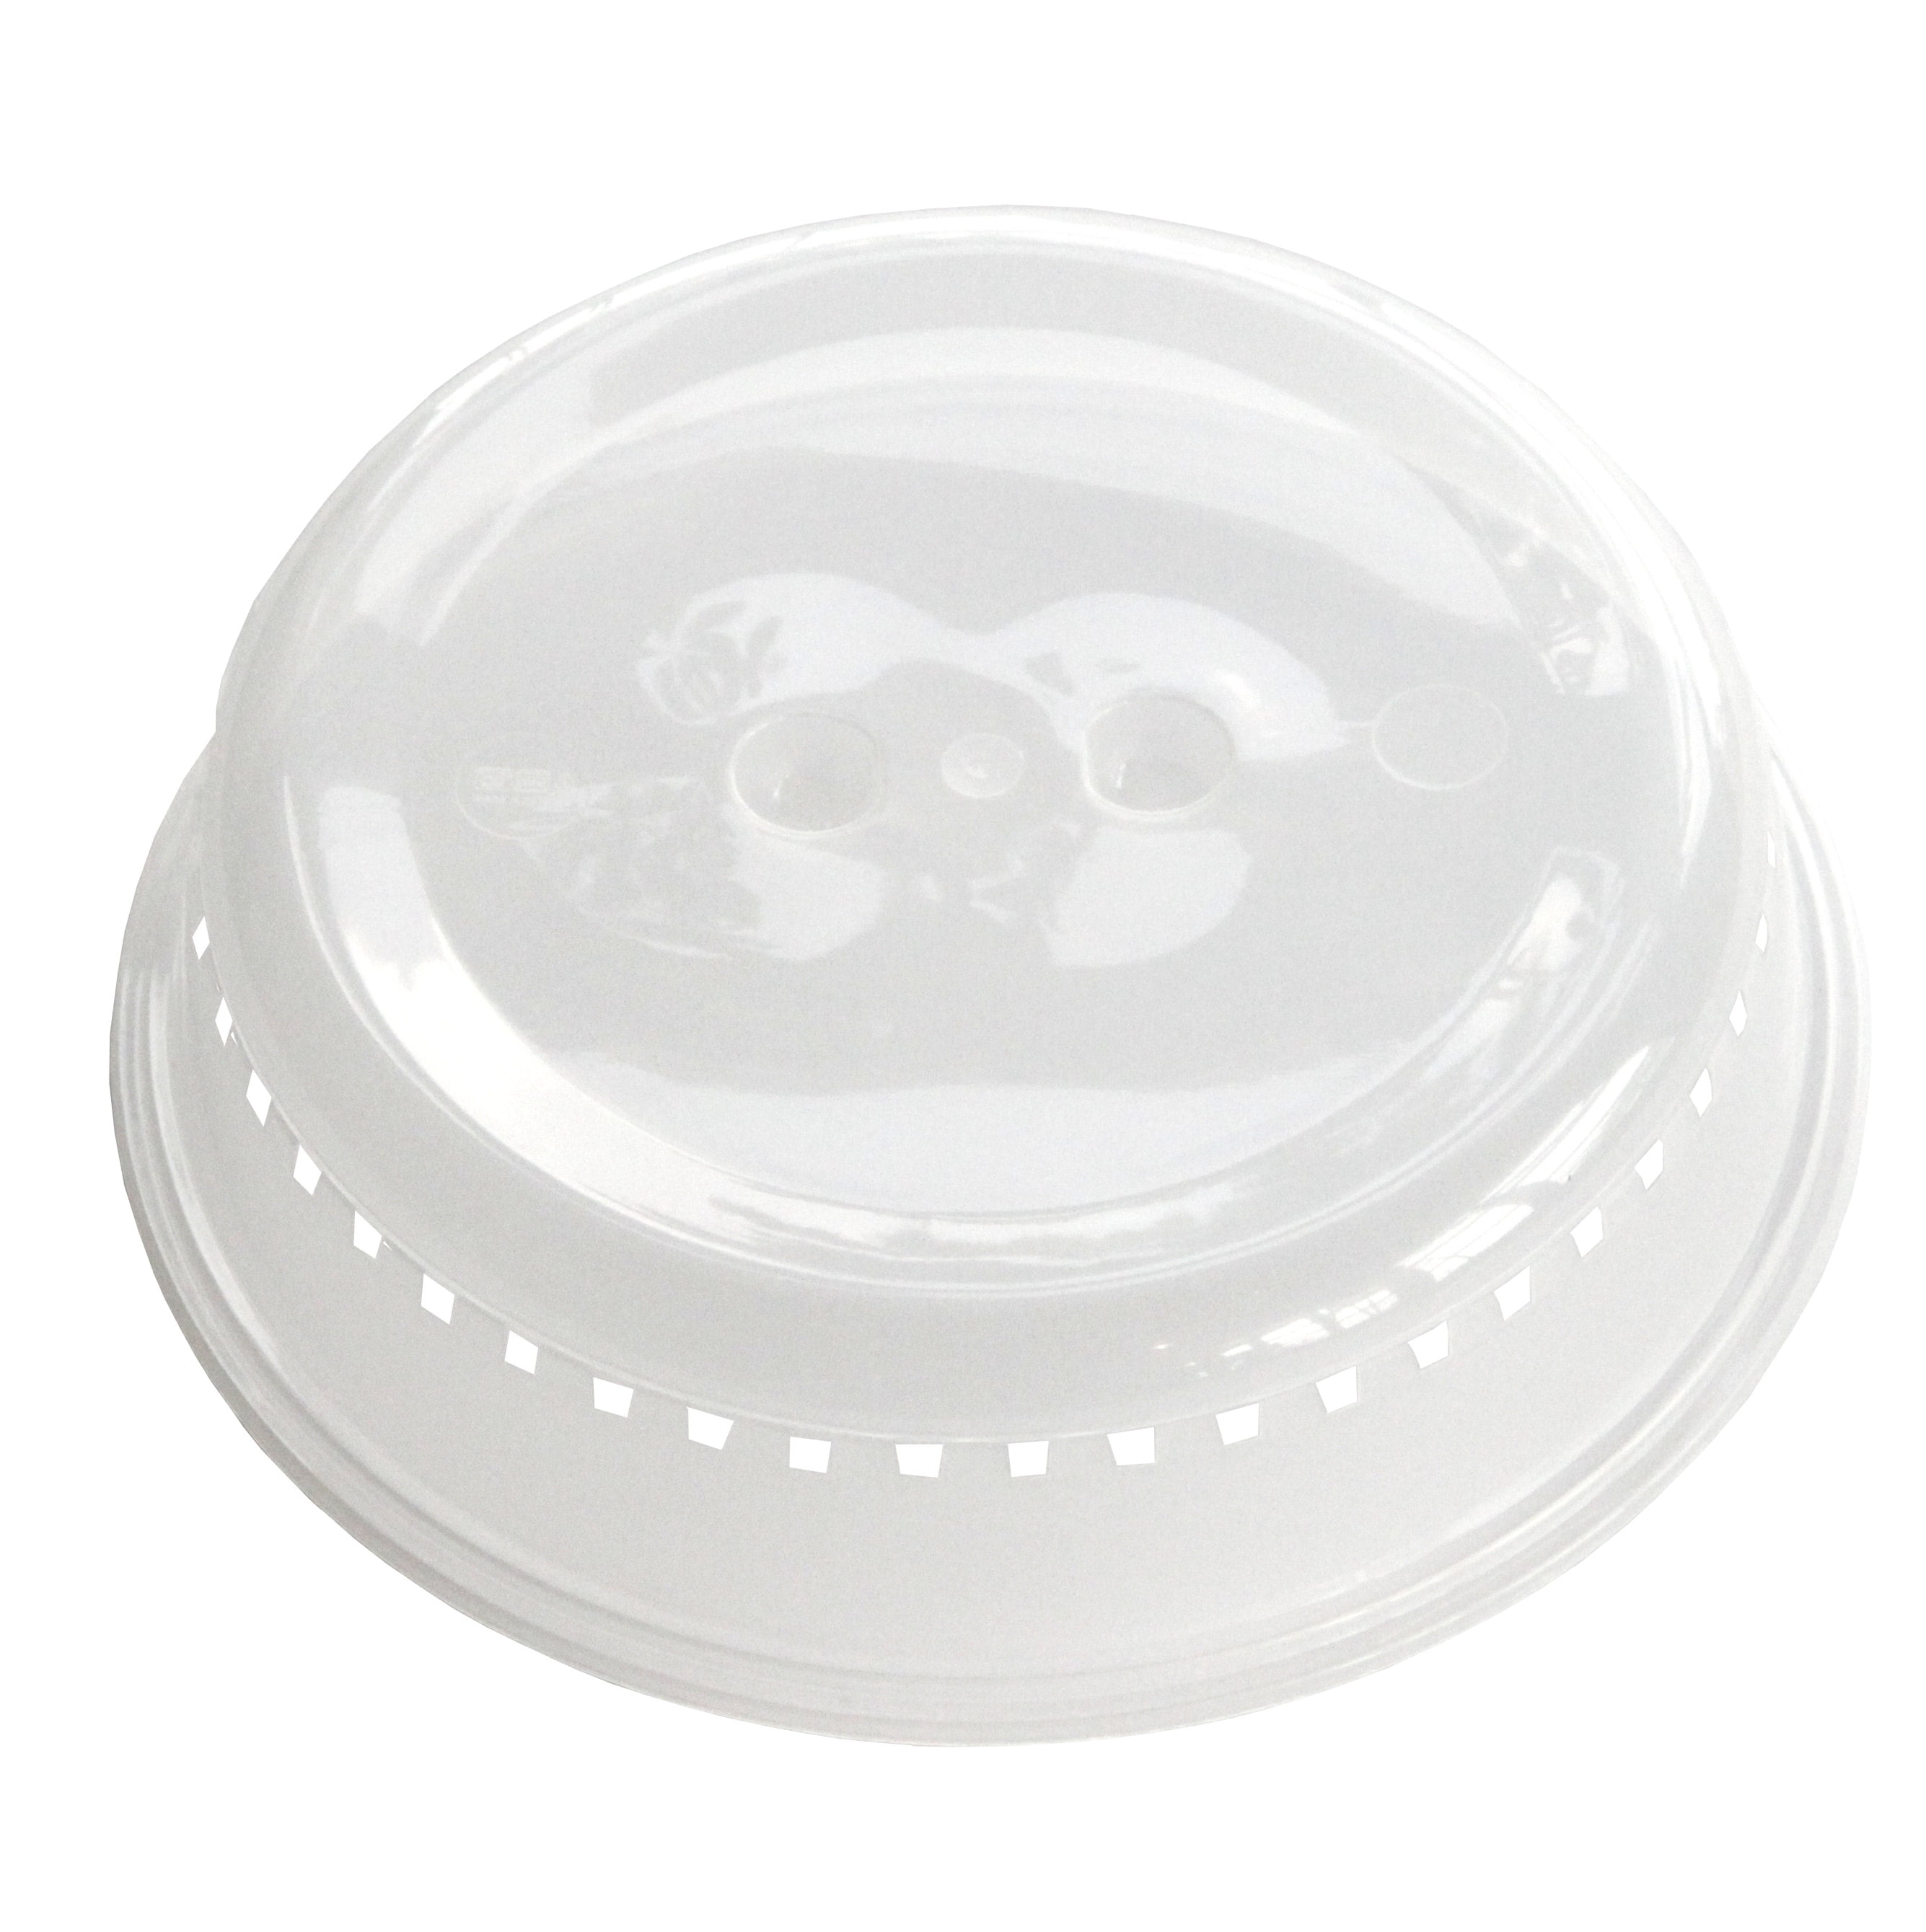 Homecraft 10-Inch Microwave Plate Cover - Clear